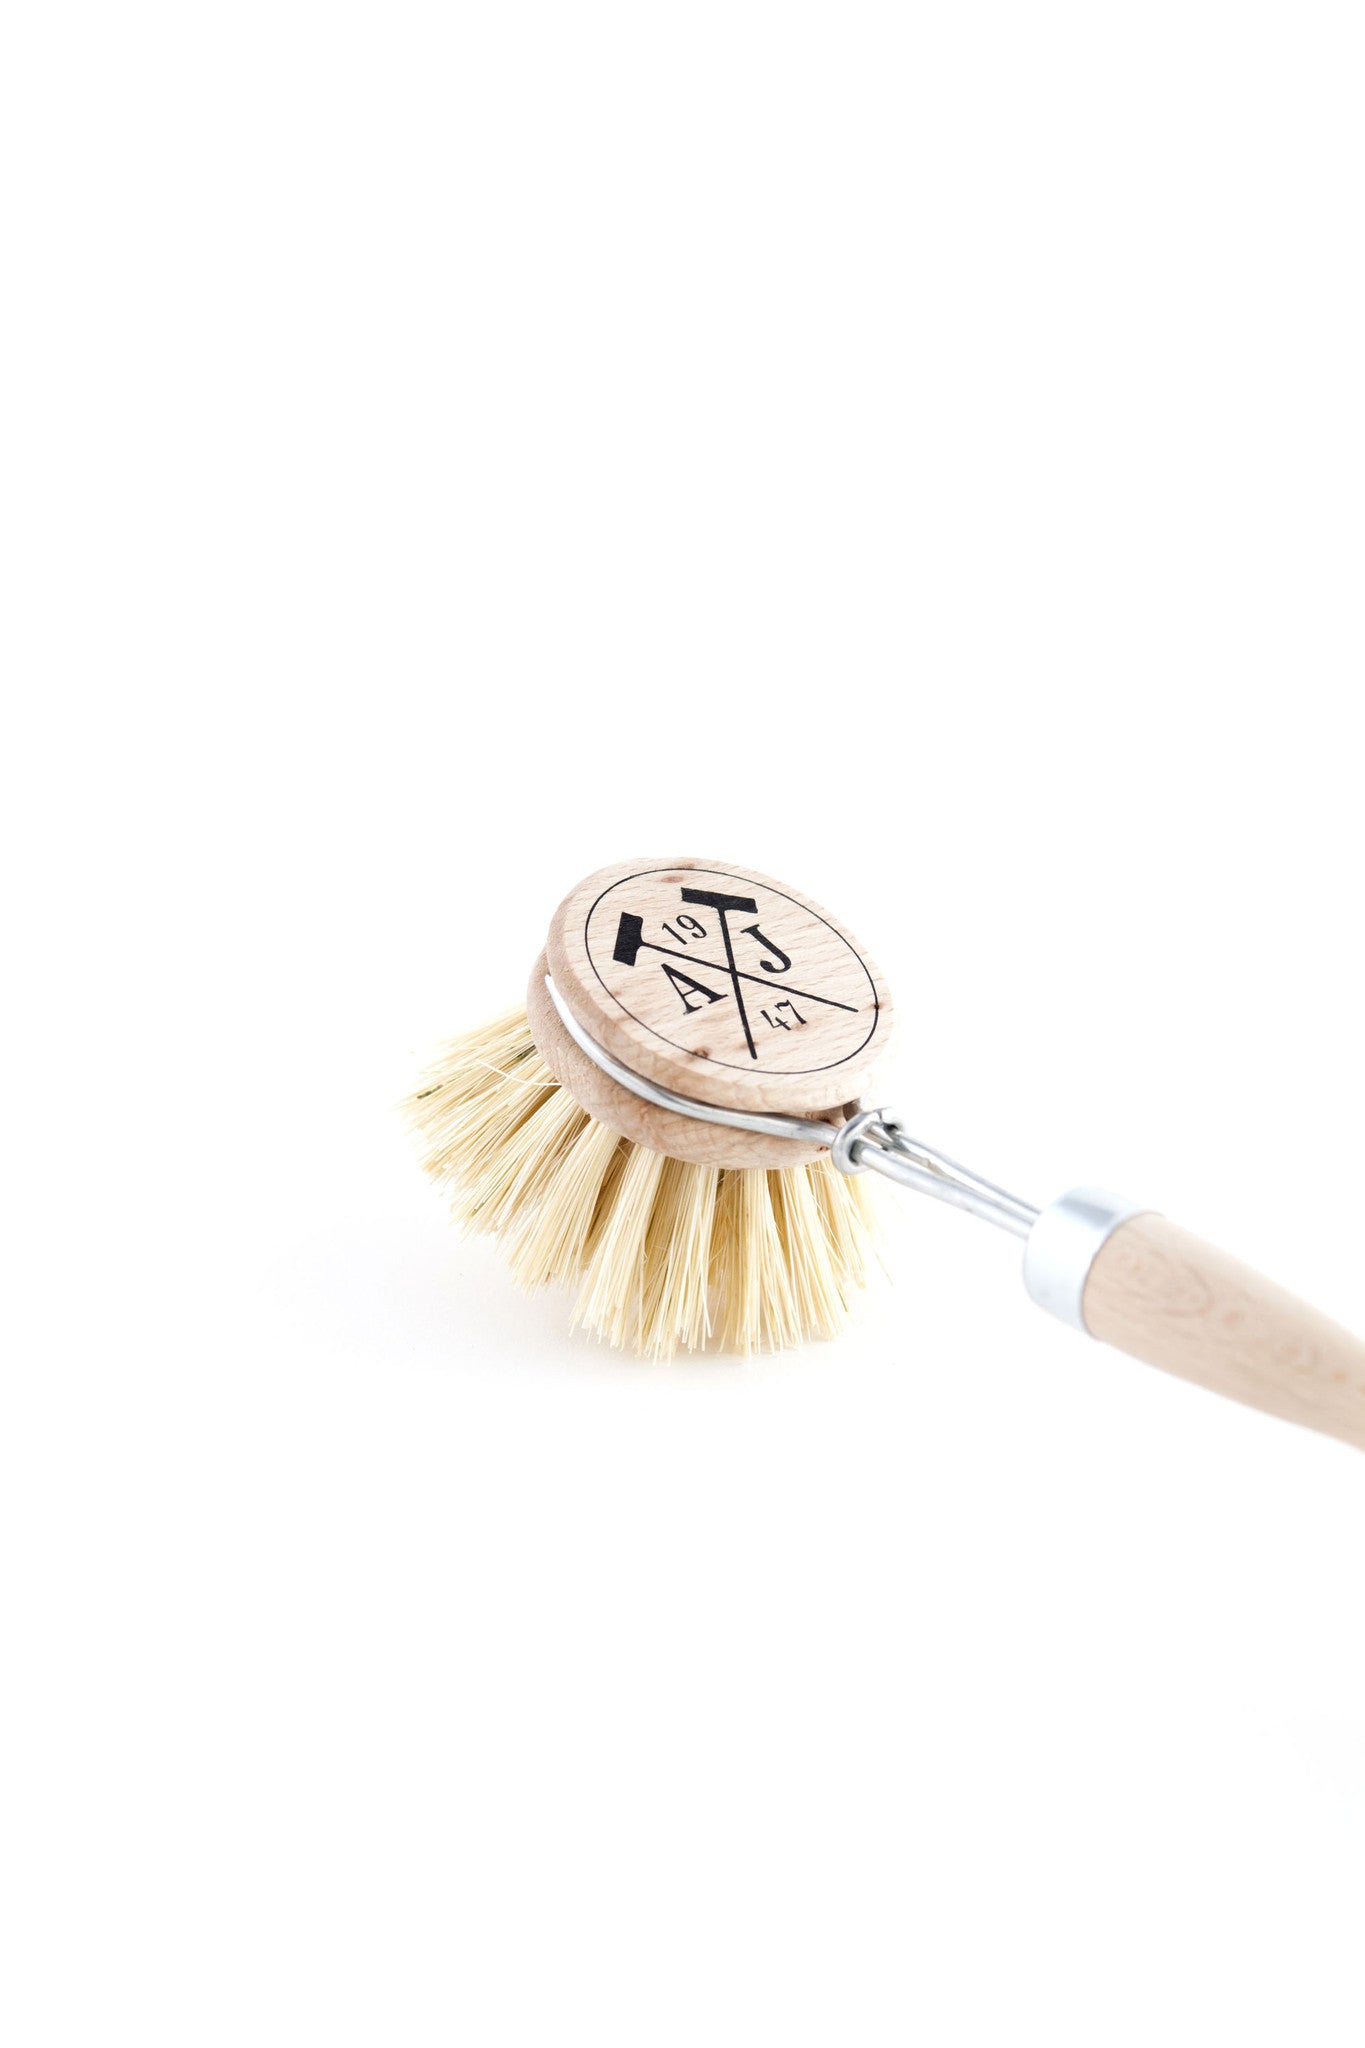 Andrée Jardin Tradition Handled Dish Brush Utilities Andrée Jardin Andrée Jardin Back in stock Brand_Andrée Jardin Home_Household Cleaning Kitchen_Accessories La Cuisine Summer Clean Up 5300-R1818_Handled_Dish_Brush_C